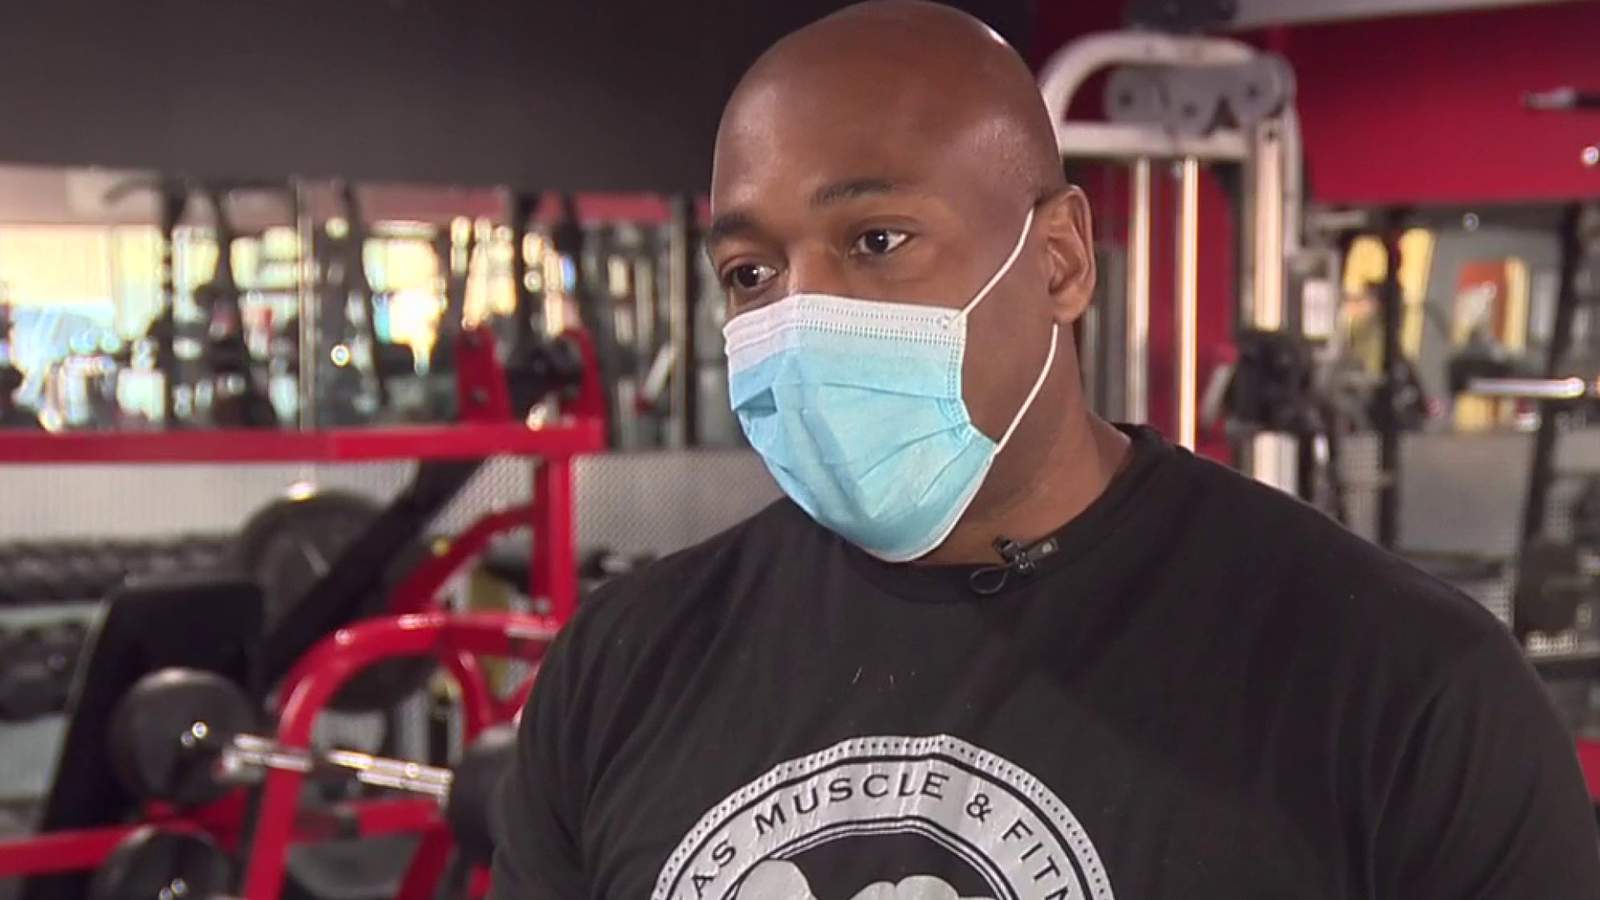 Gym owners seeing results after ‘putting in the work’ during COVID-19 pandemic